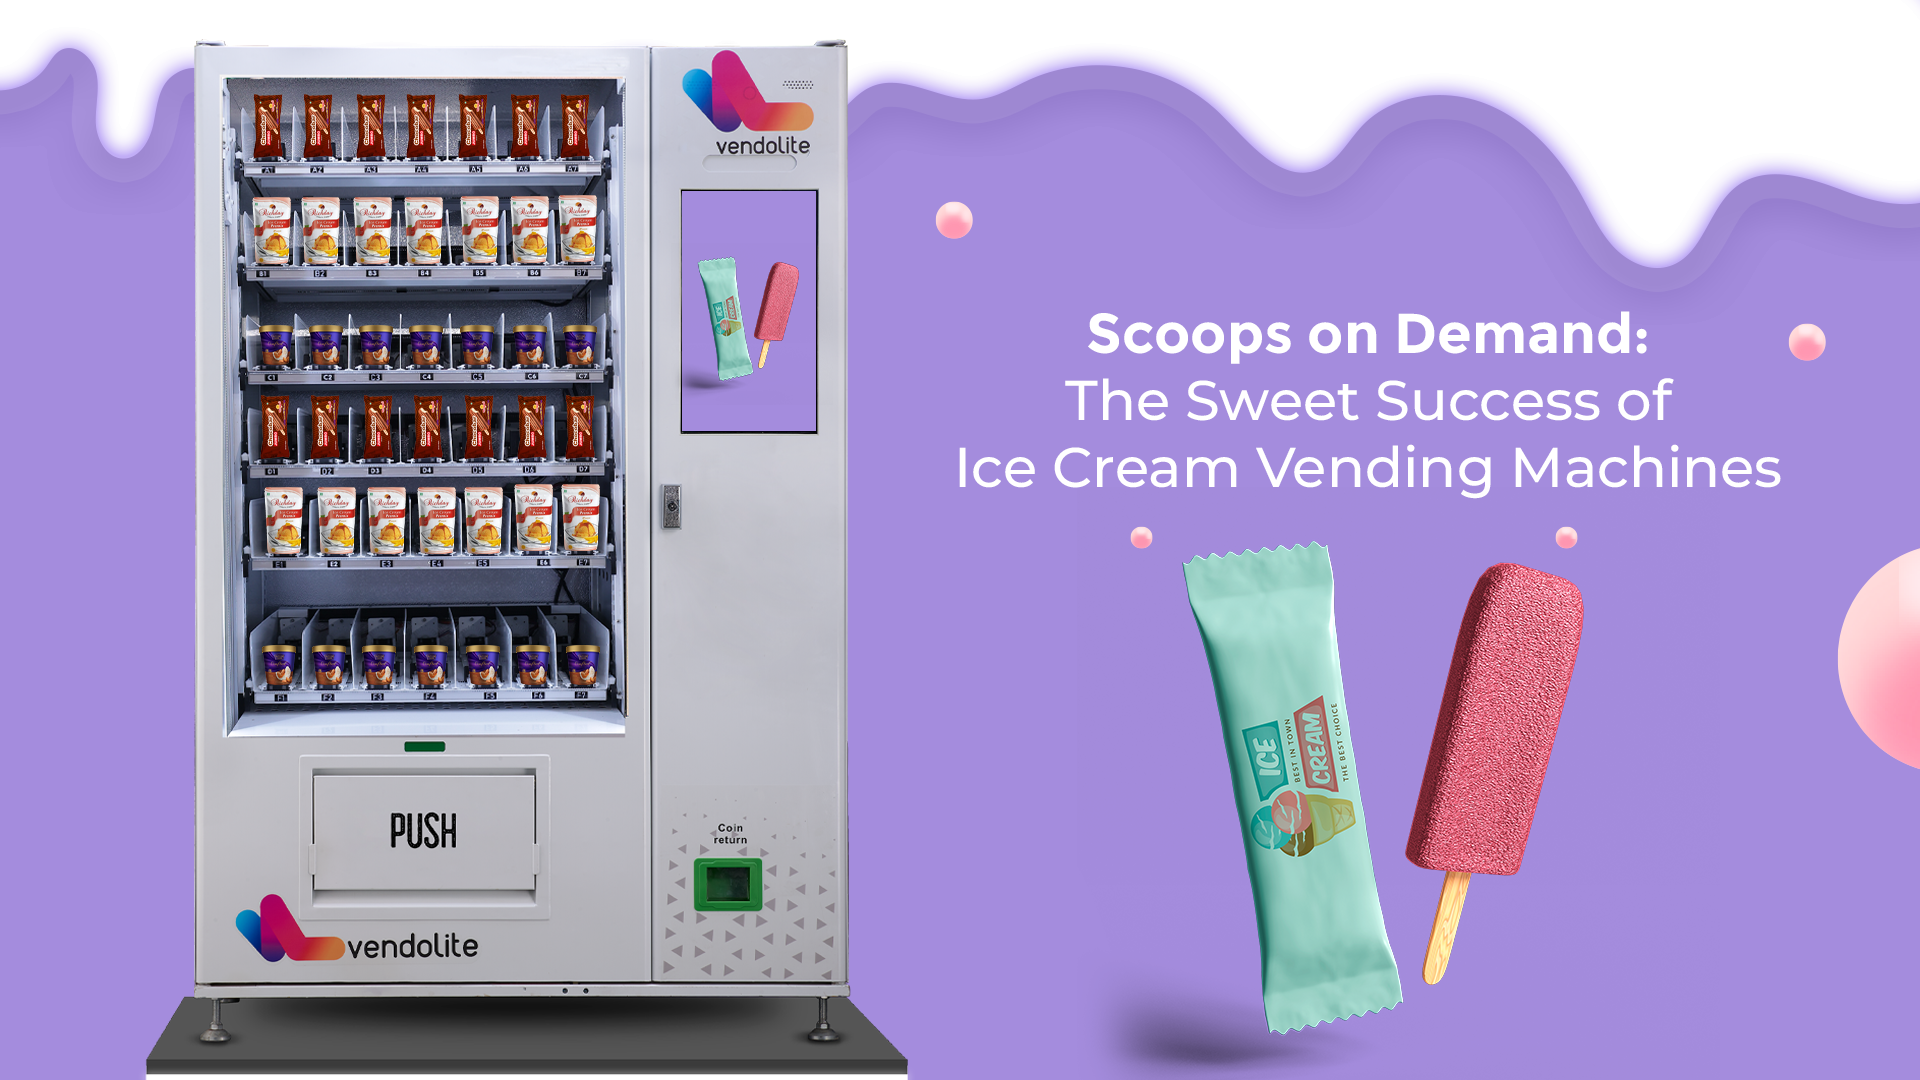 Scoops on Demand: The Sweet Success of Ice Cream Vending Machines